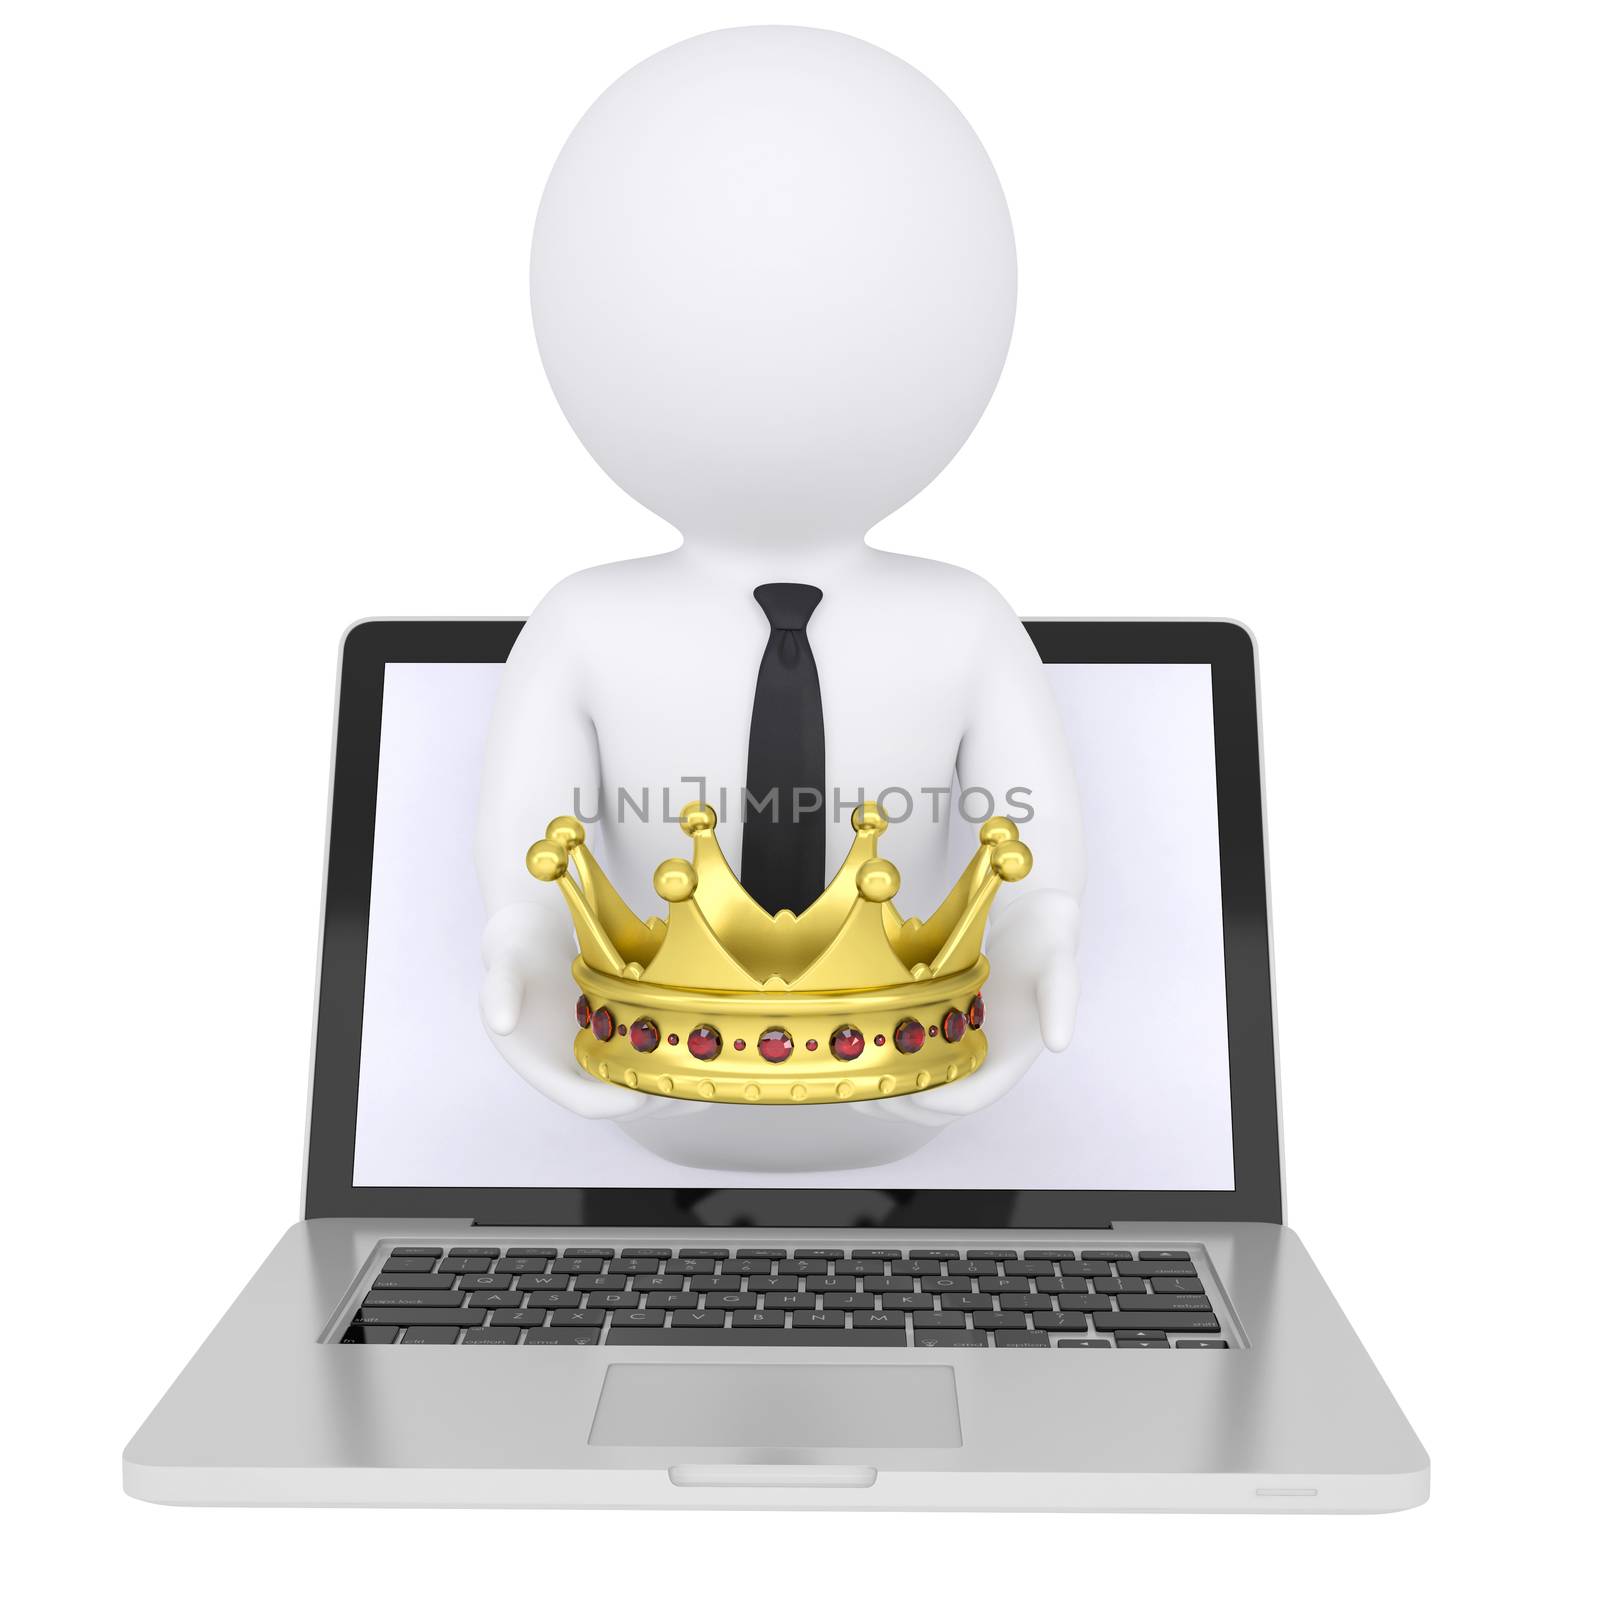 3d white man out of the computer holds a golden crown. Isolated render on a white background